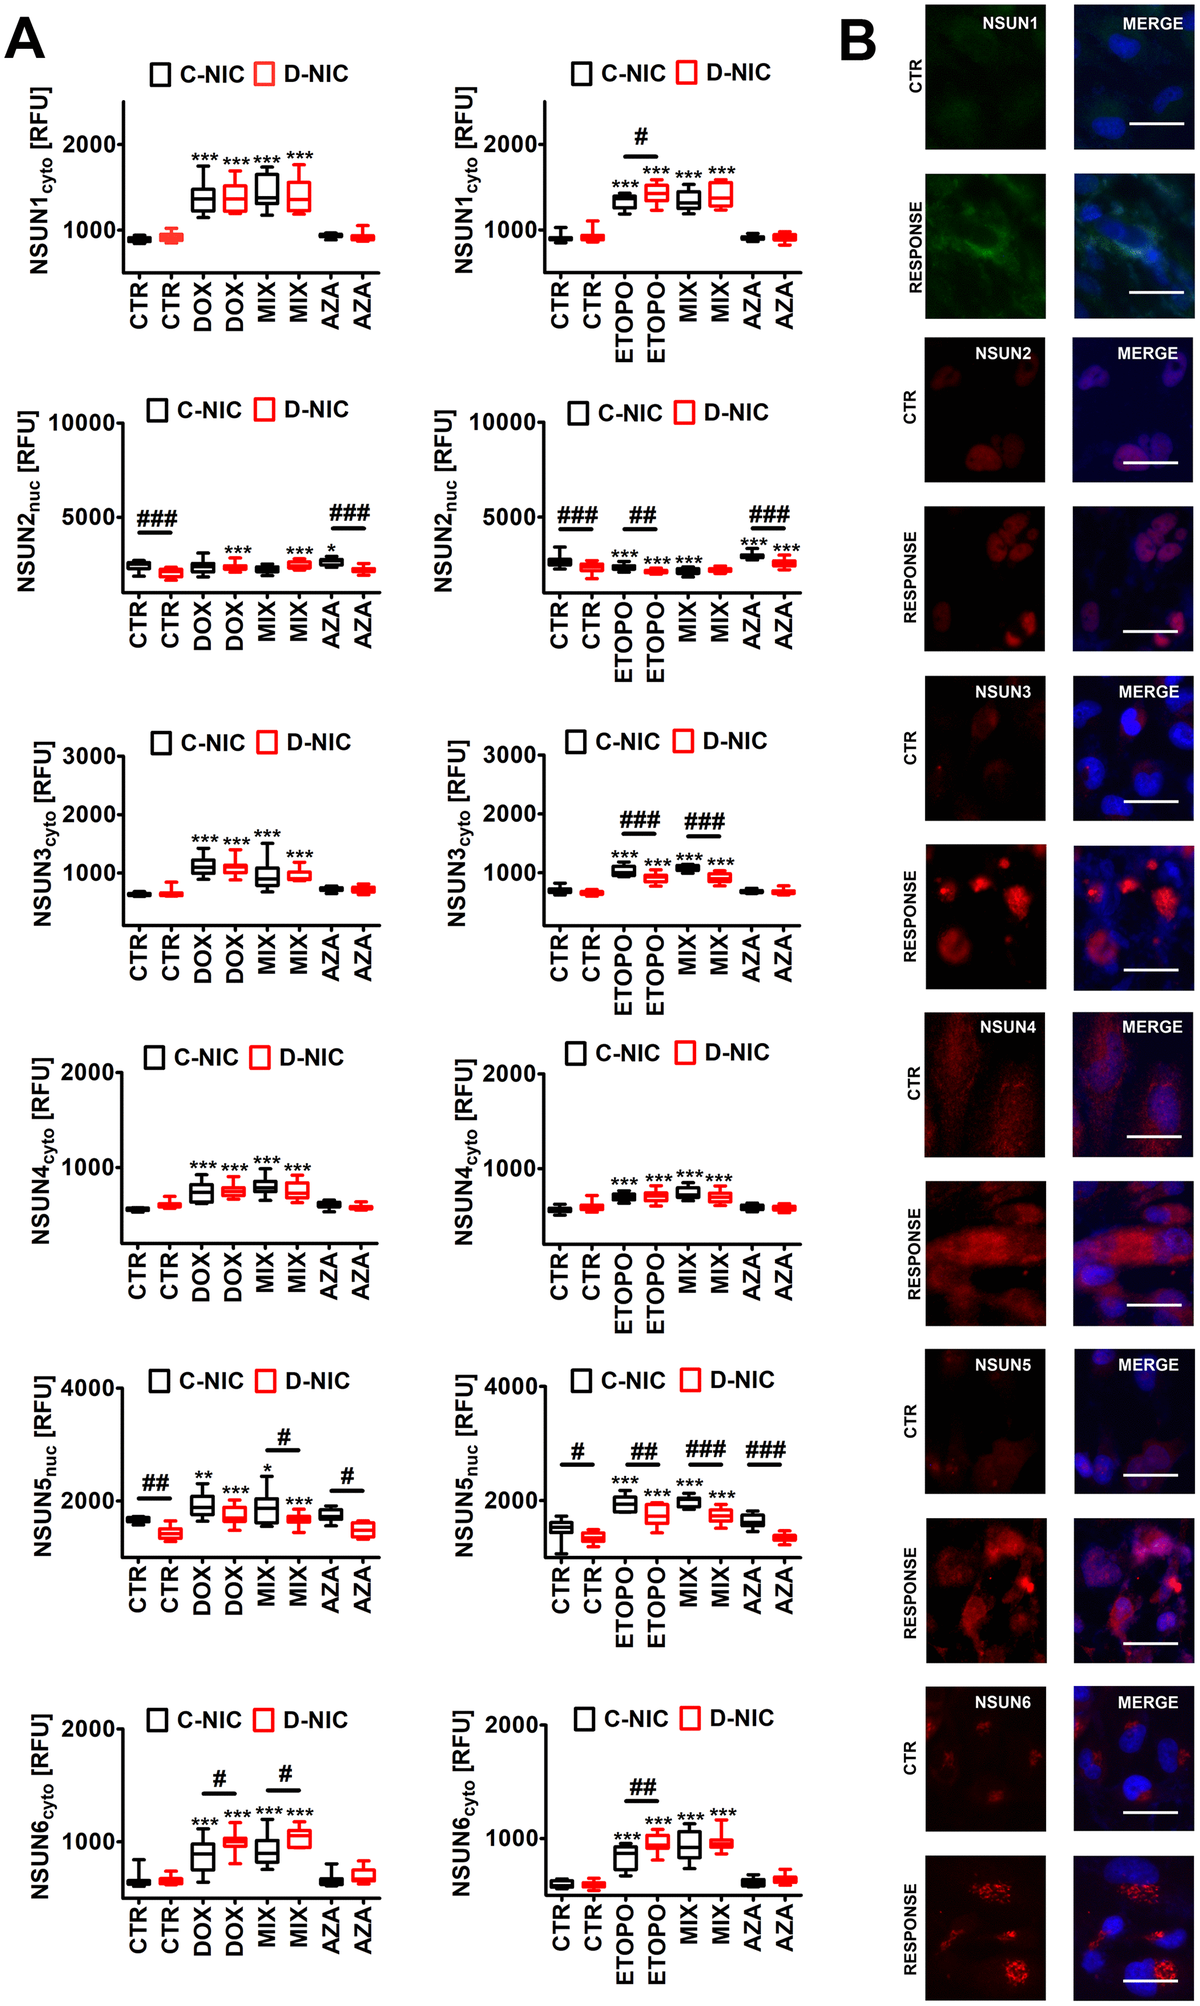 DNMT2/TRDMT1 gene knockout-mediated changes in the levels of NSUN proteins (A, B) in U-251 MG glioblastoma cells treated with DOX or ETOPO. (A) The levels of NSUN1, NSUN2, NSUN3, NSUN4, NSUN5 and NSUN6 are expressed as relative fluorescence units (RFU). Box and whisker plots are shown, n = 3, ***p **p *p a posteriori test), ###p ##p #p a posteriori test). (B) NSUN1, NSUN2, NSUN3, NSUN4, NSUN5 and NSUN6 immunostaining (red). Representative microphotographs are shown, objective 20x, nucleus staining (blue), RESPONSE, representative DOX or ETOPO treatment. CTR, control conditions; DOX, doxorubicin treatment; ETOPO, etoposide treatment; AZA, azacytidine treatment; MIX, azacytidine post-treatment; C-NIC, control cells with unmodified levels of DNMT2/TRDMT1 containing control plasmid; D-NIC, cells with DNMT2/TRDMT1 gene knockout containing dedicated DNMT2 double nickase plasmid.